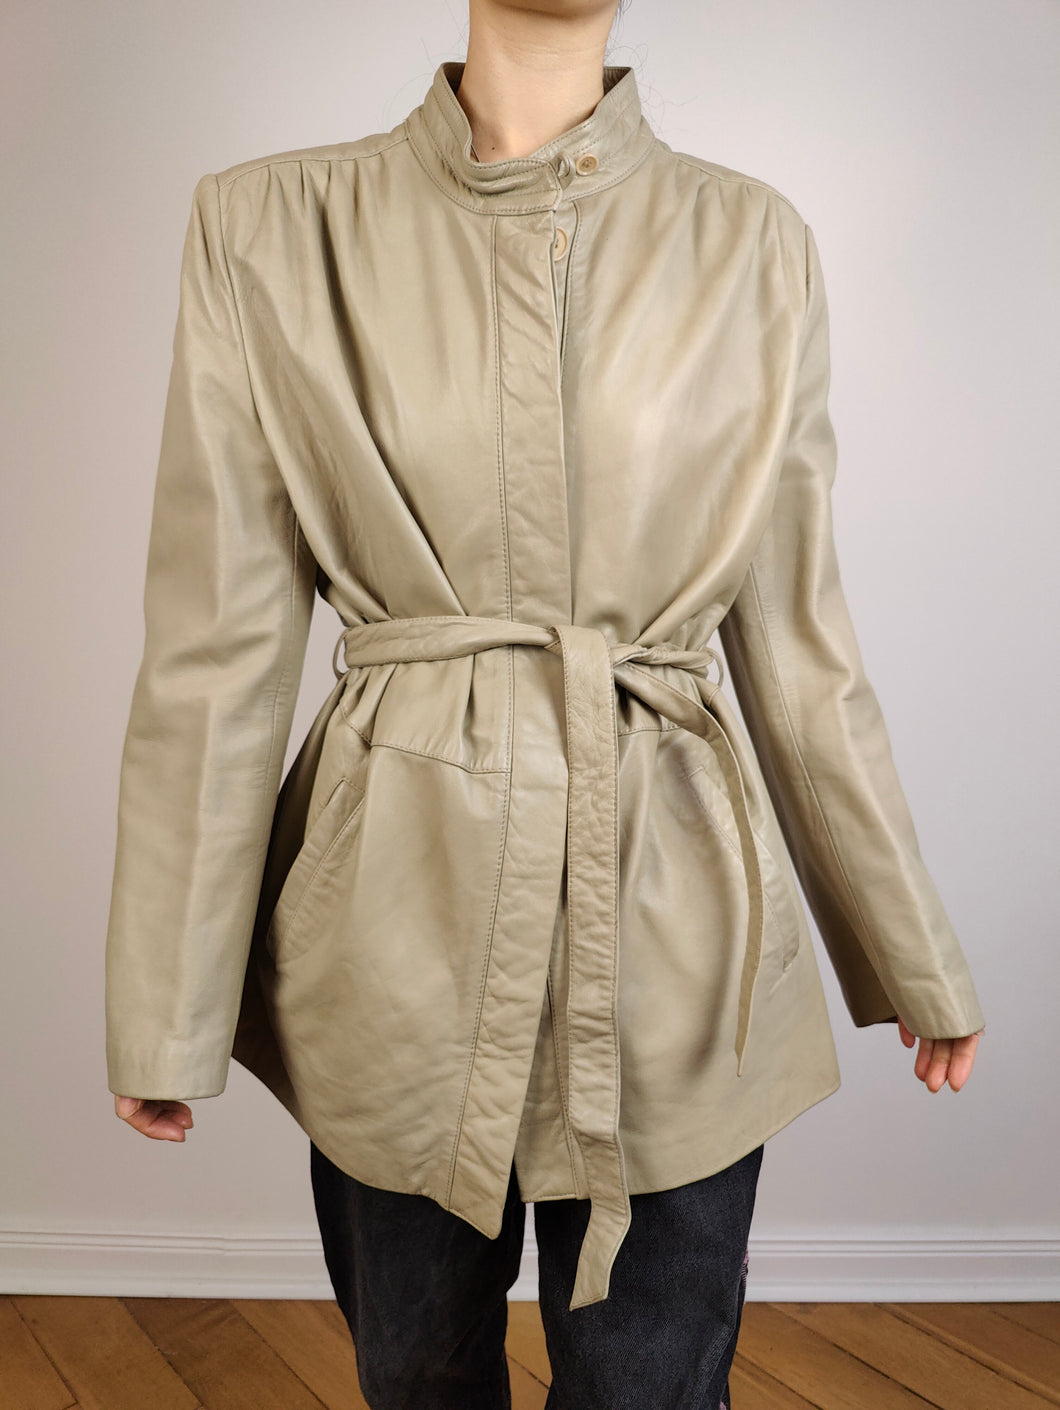 The Nappa Leather Beige Cream Coat | Vintage real lamb leather minimal trench coat waist tie jacket off white ivory IT48 S-M